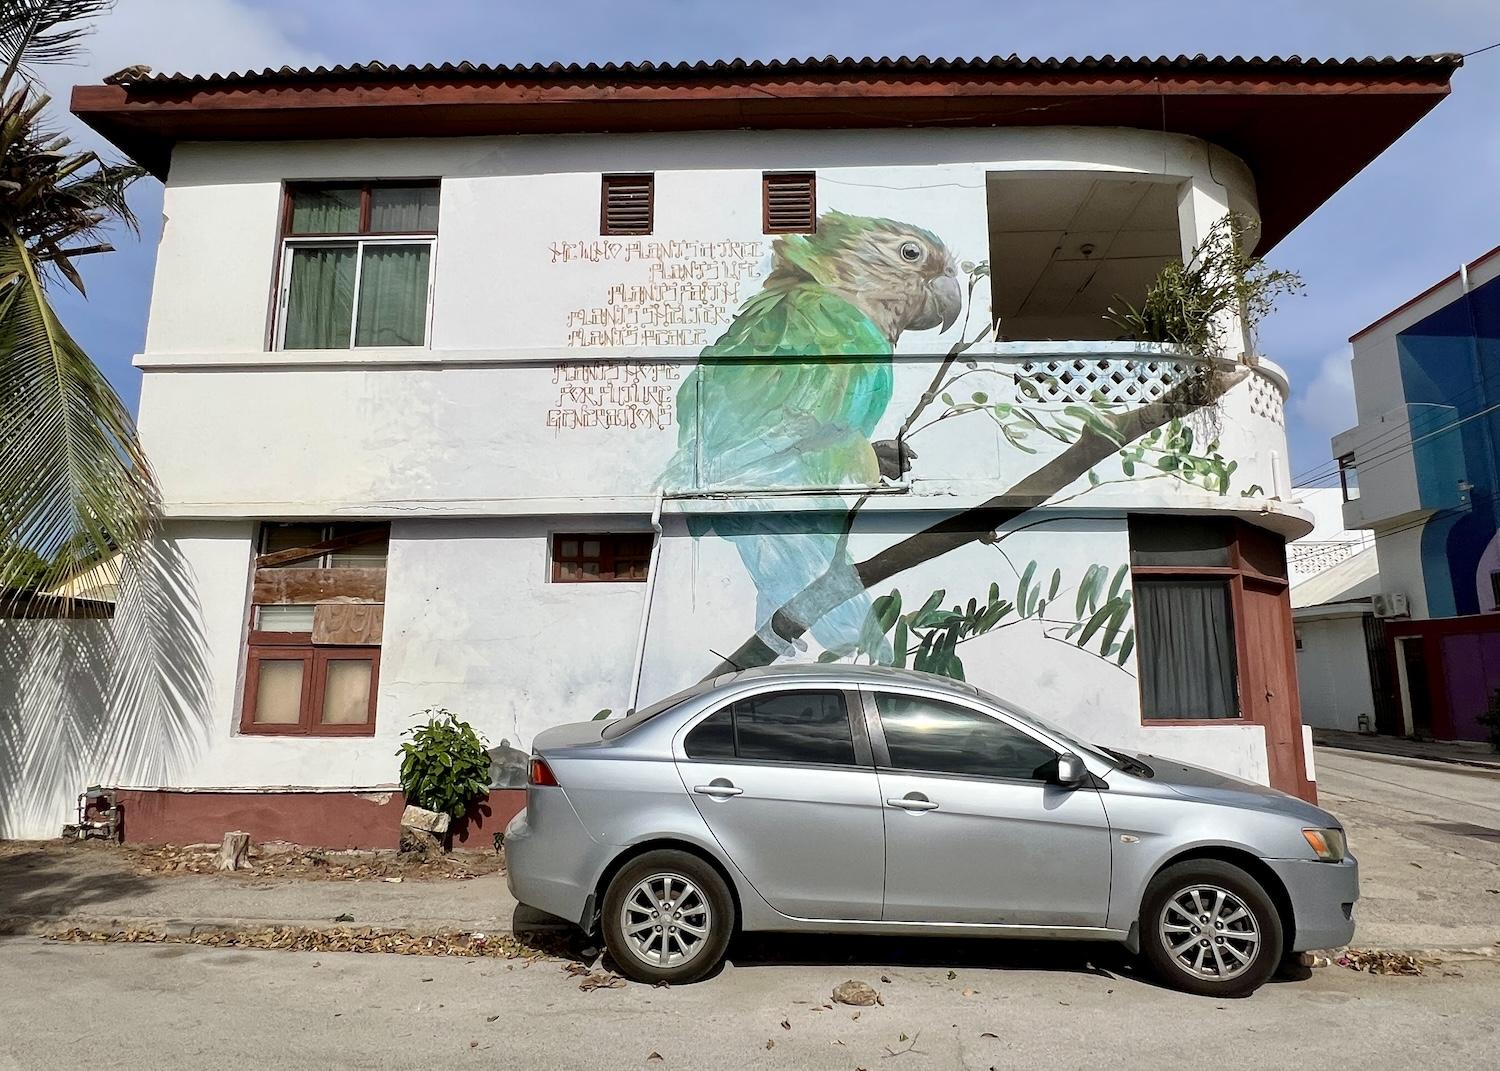 In San Nicolas, this 2017 mural by Garrick Marchena is called "Prikichi Please Don't Go."